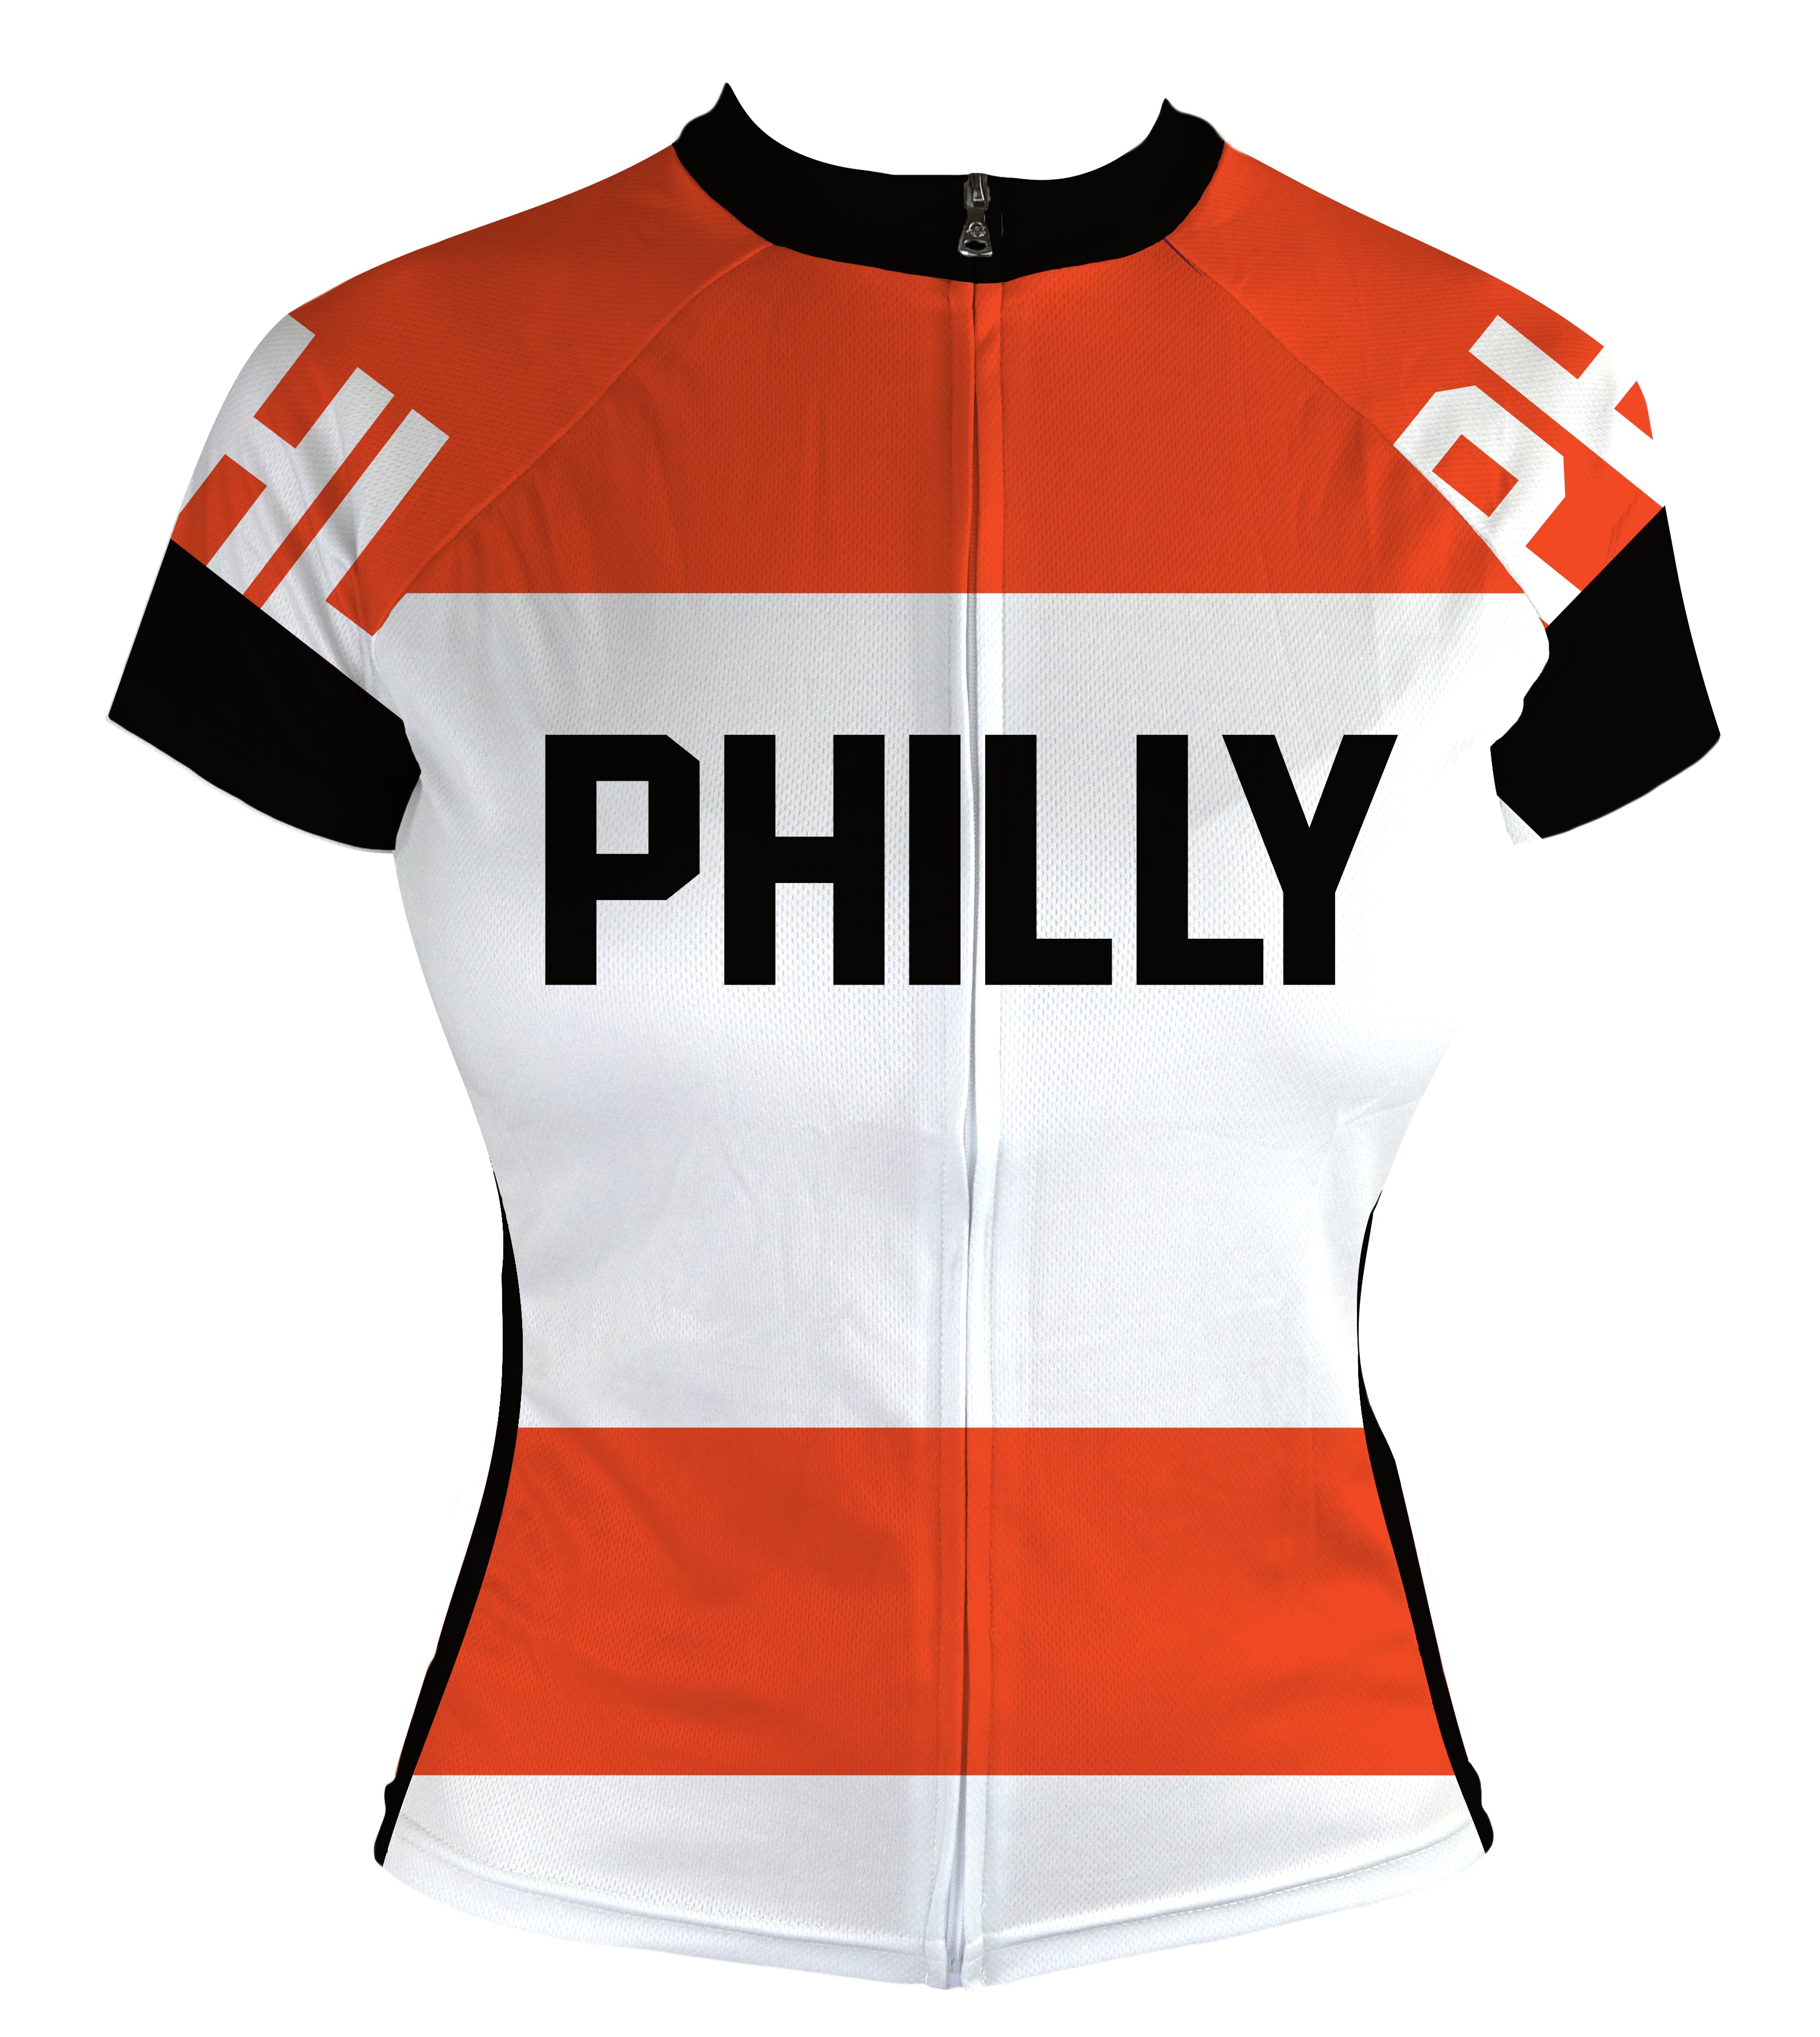 Philly Retro FLY Women's Club-Cut Cycling Jersey by Hill Killer